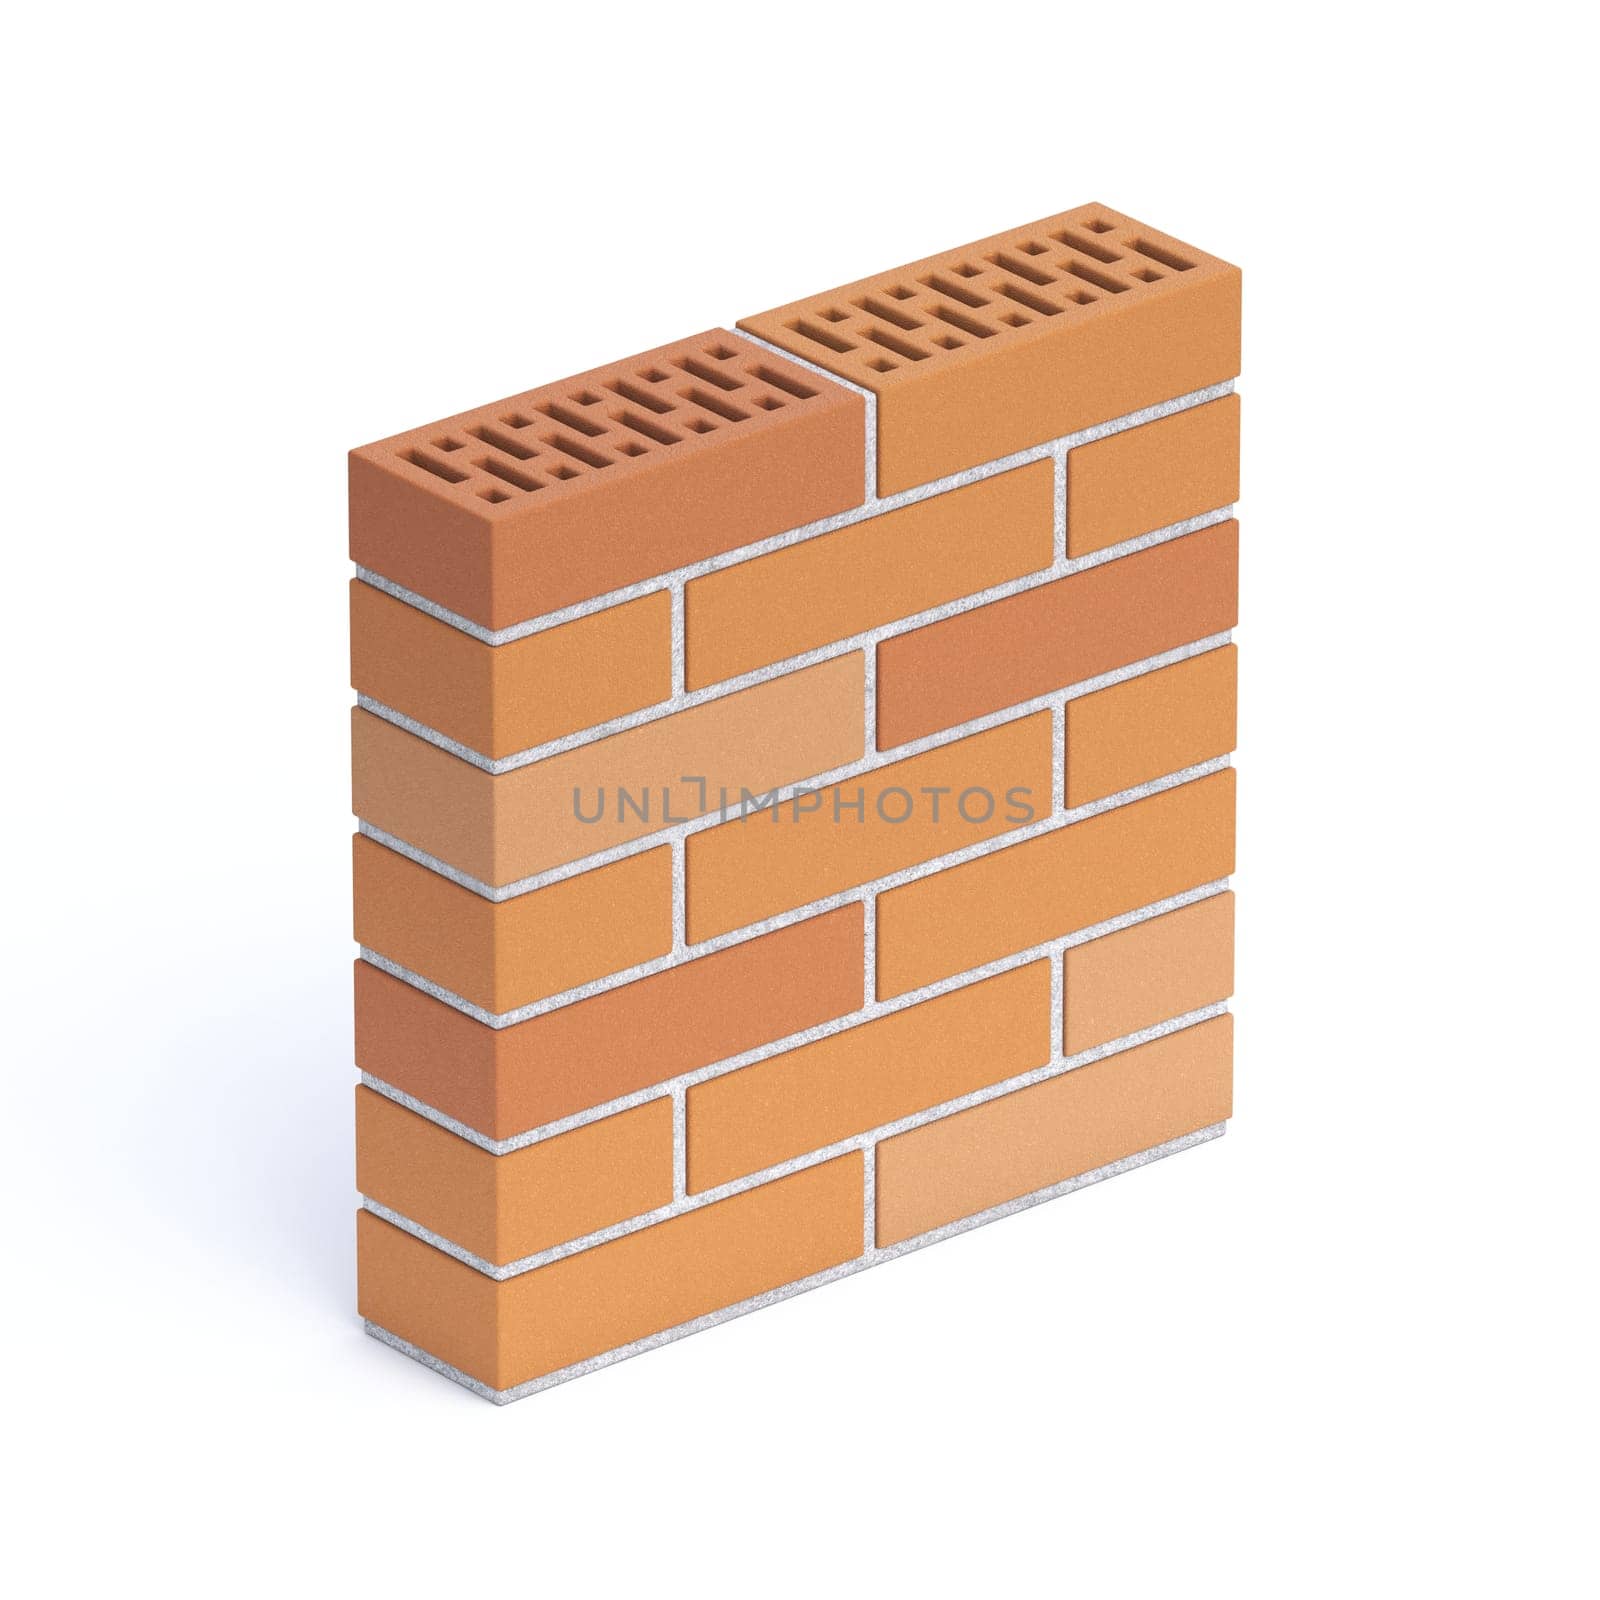 Bricks wall icon 3D rendering illustration isolated on white background